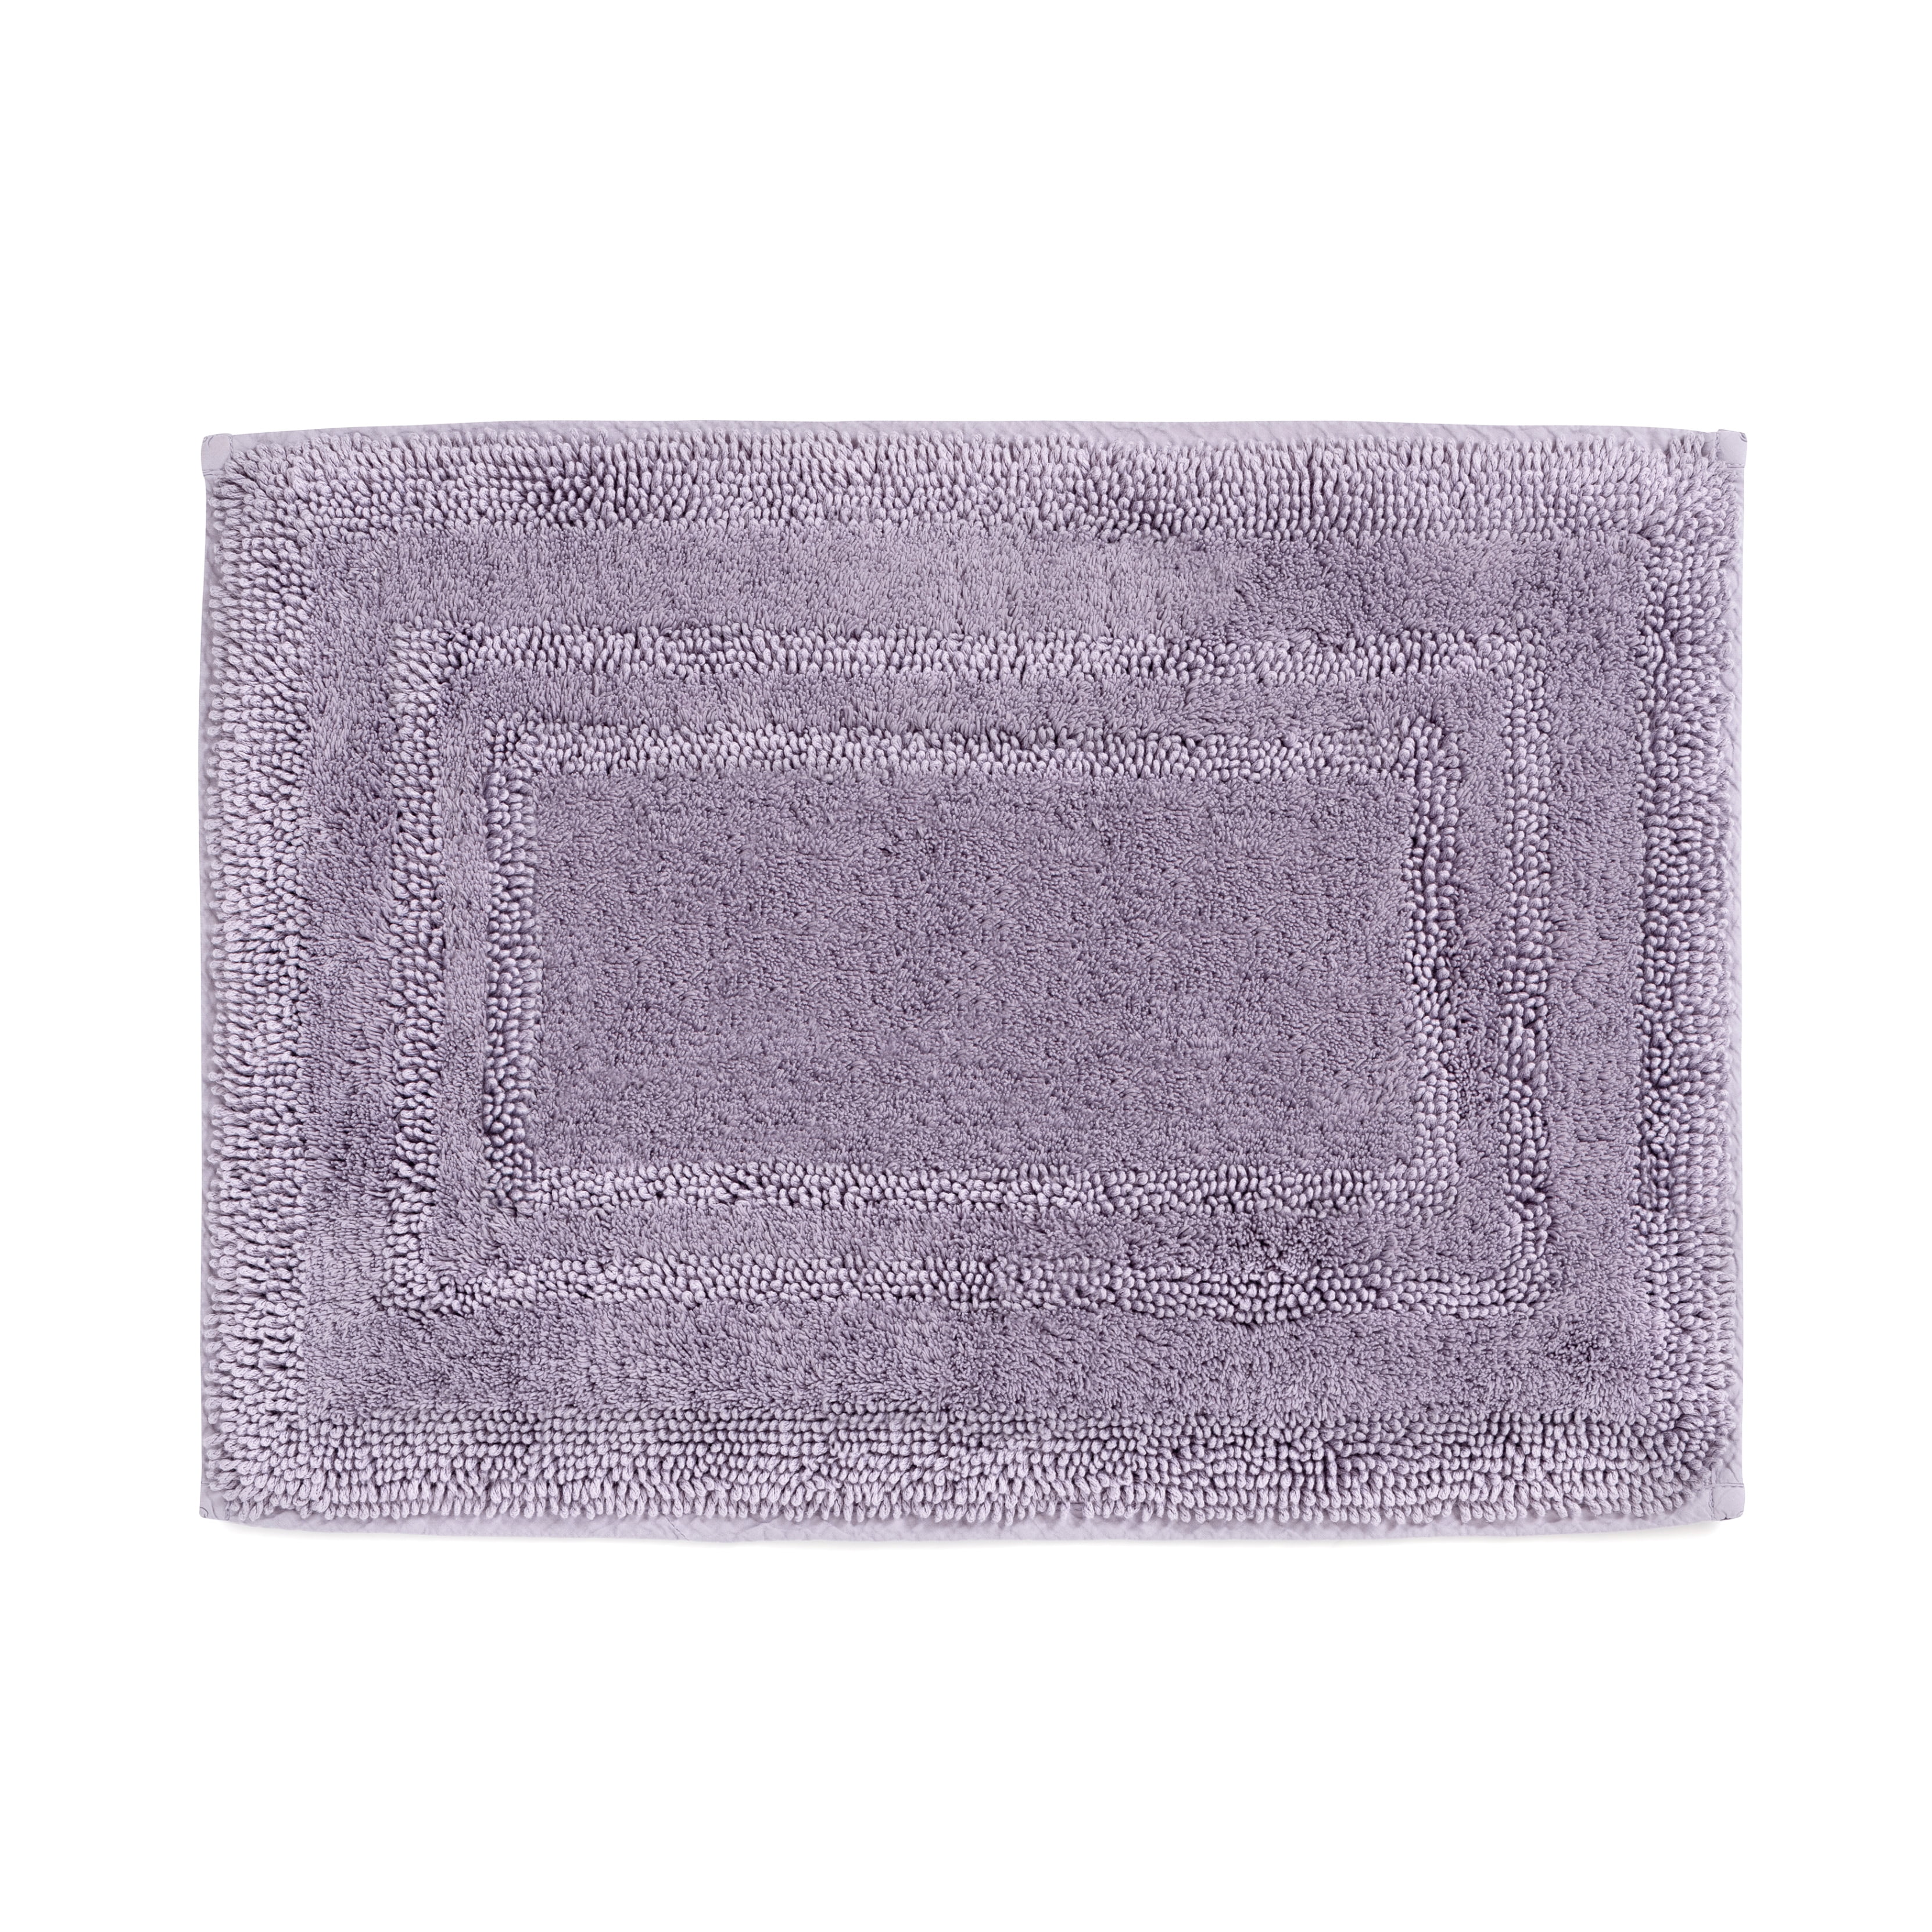 Luxor Linens Lakeview Luxury Fuzzy Bath Rugs, Size: 2, Gray